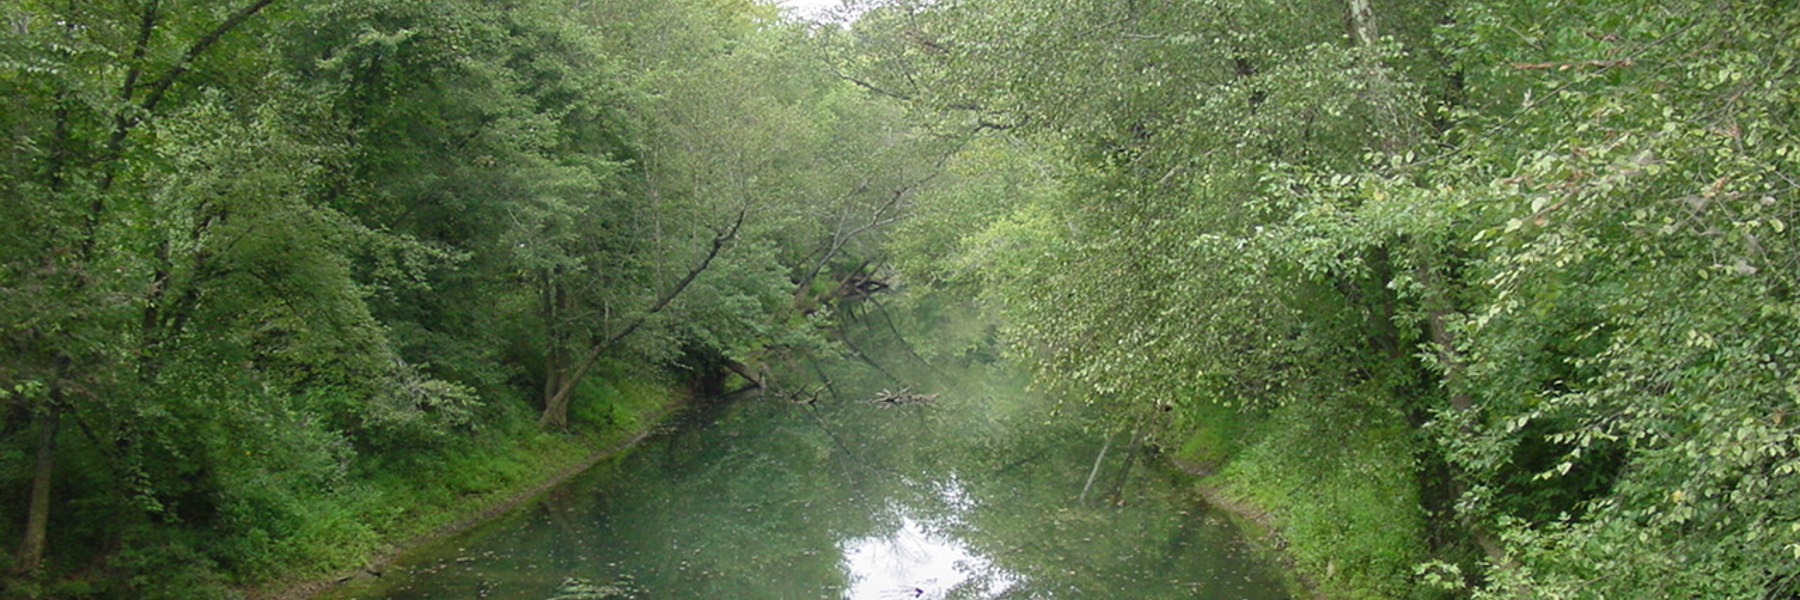 River Overhead View